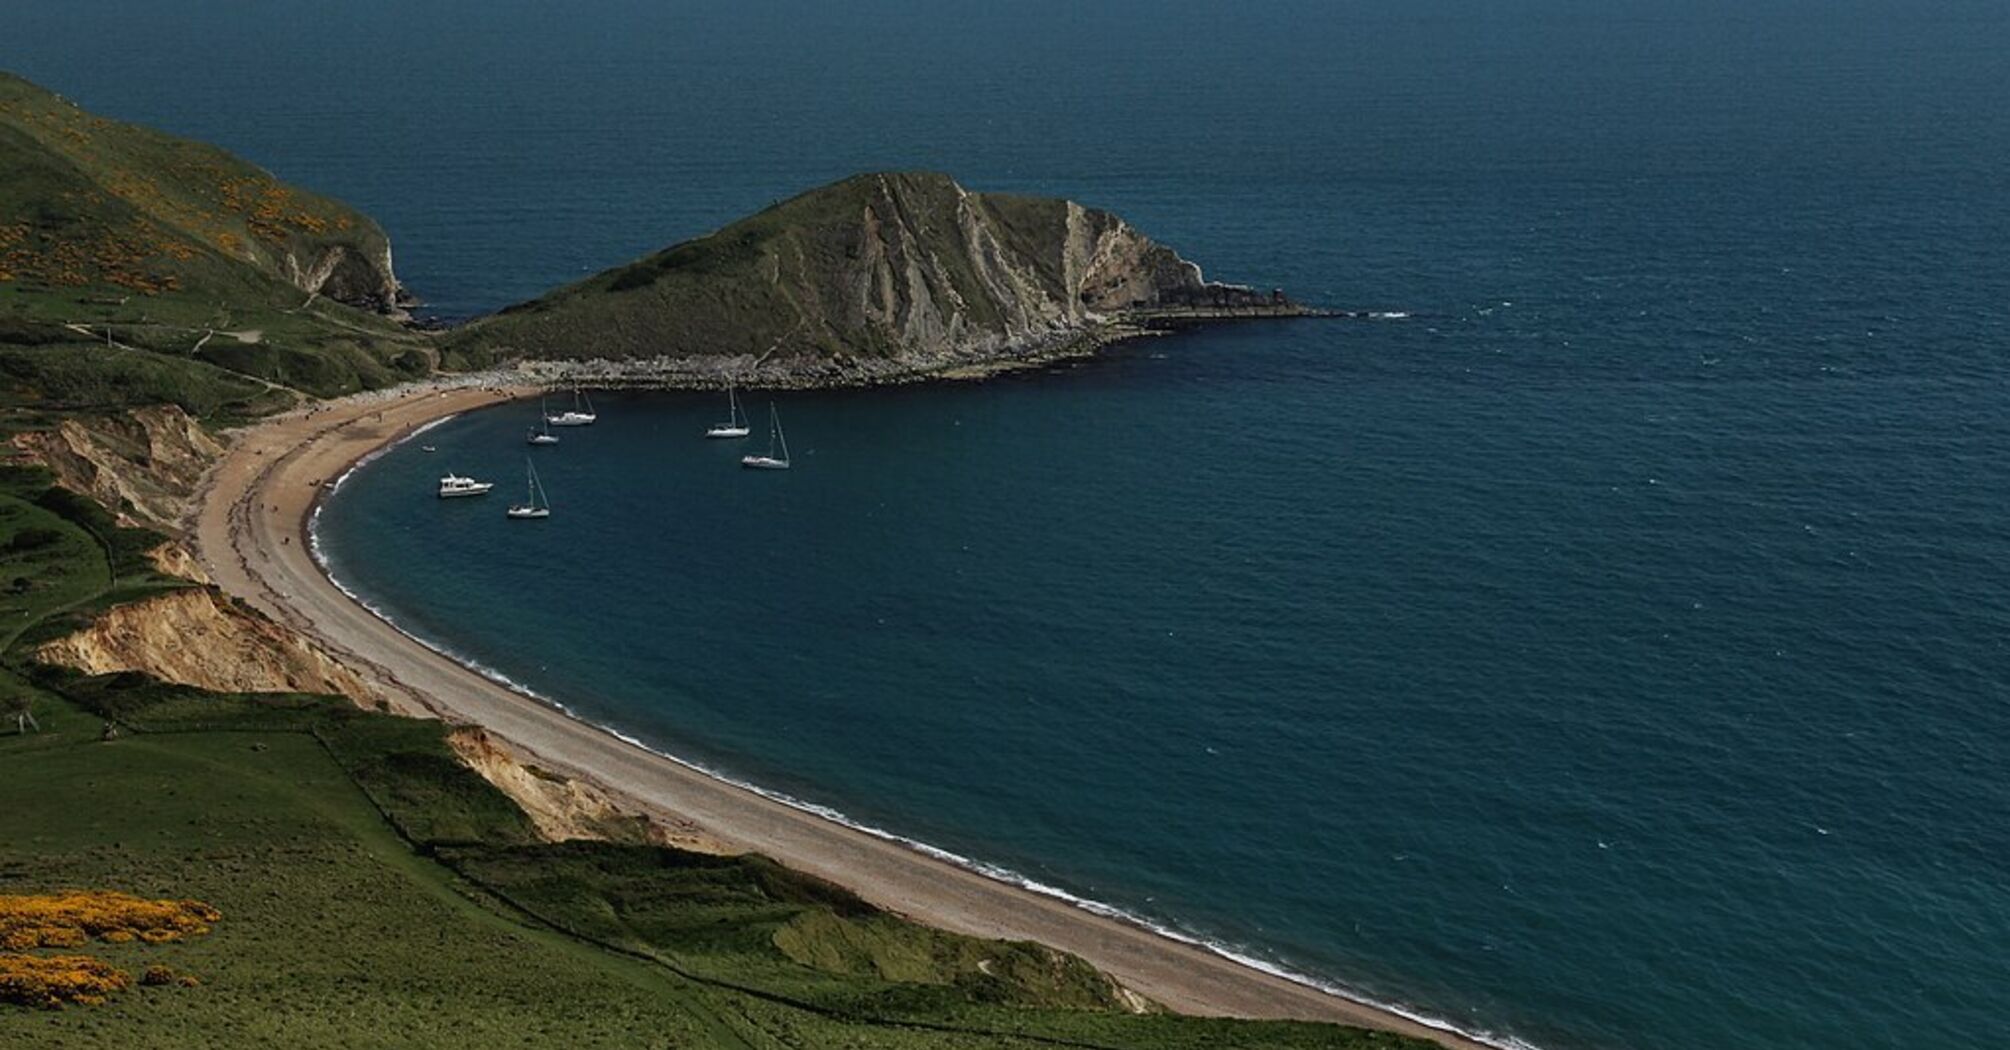 Stunning nature and fascinating ruins: a secret beach in Dorset 3 hours from London